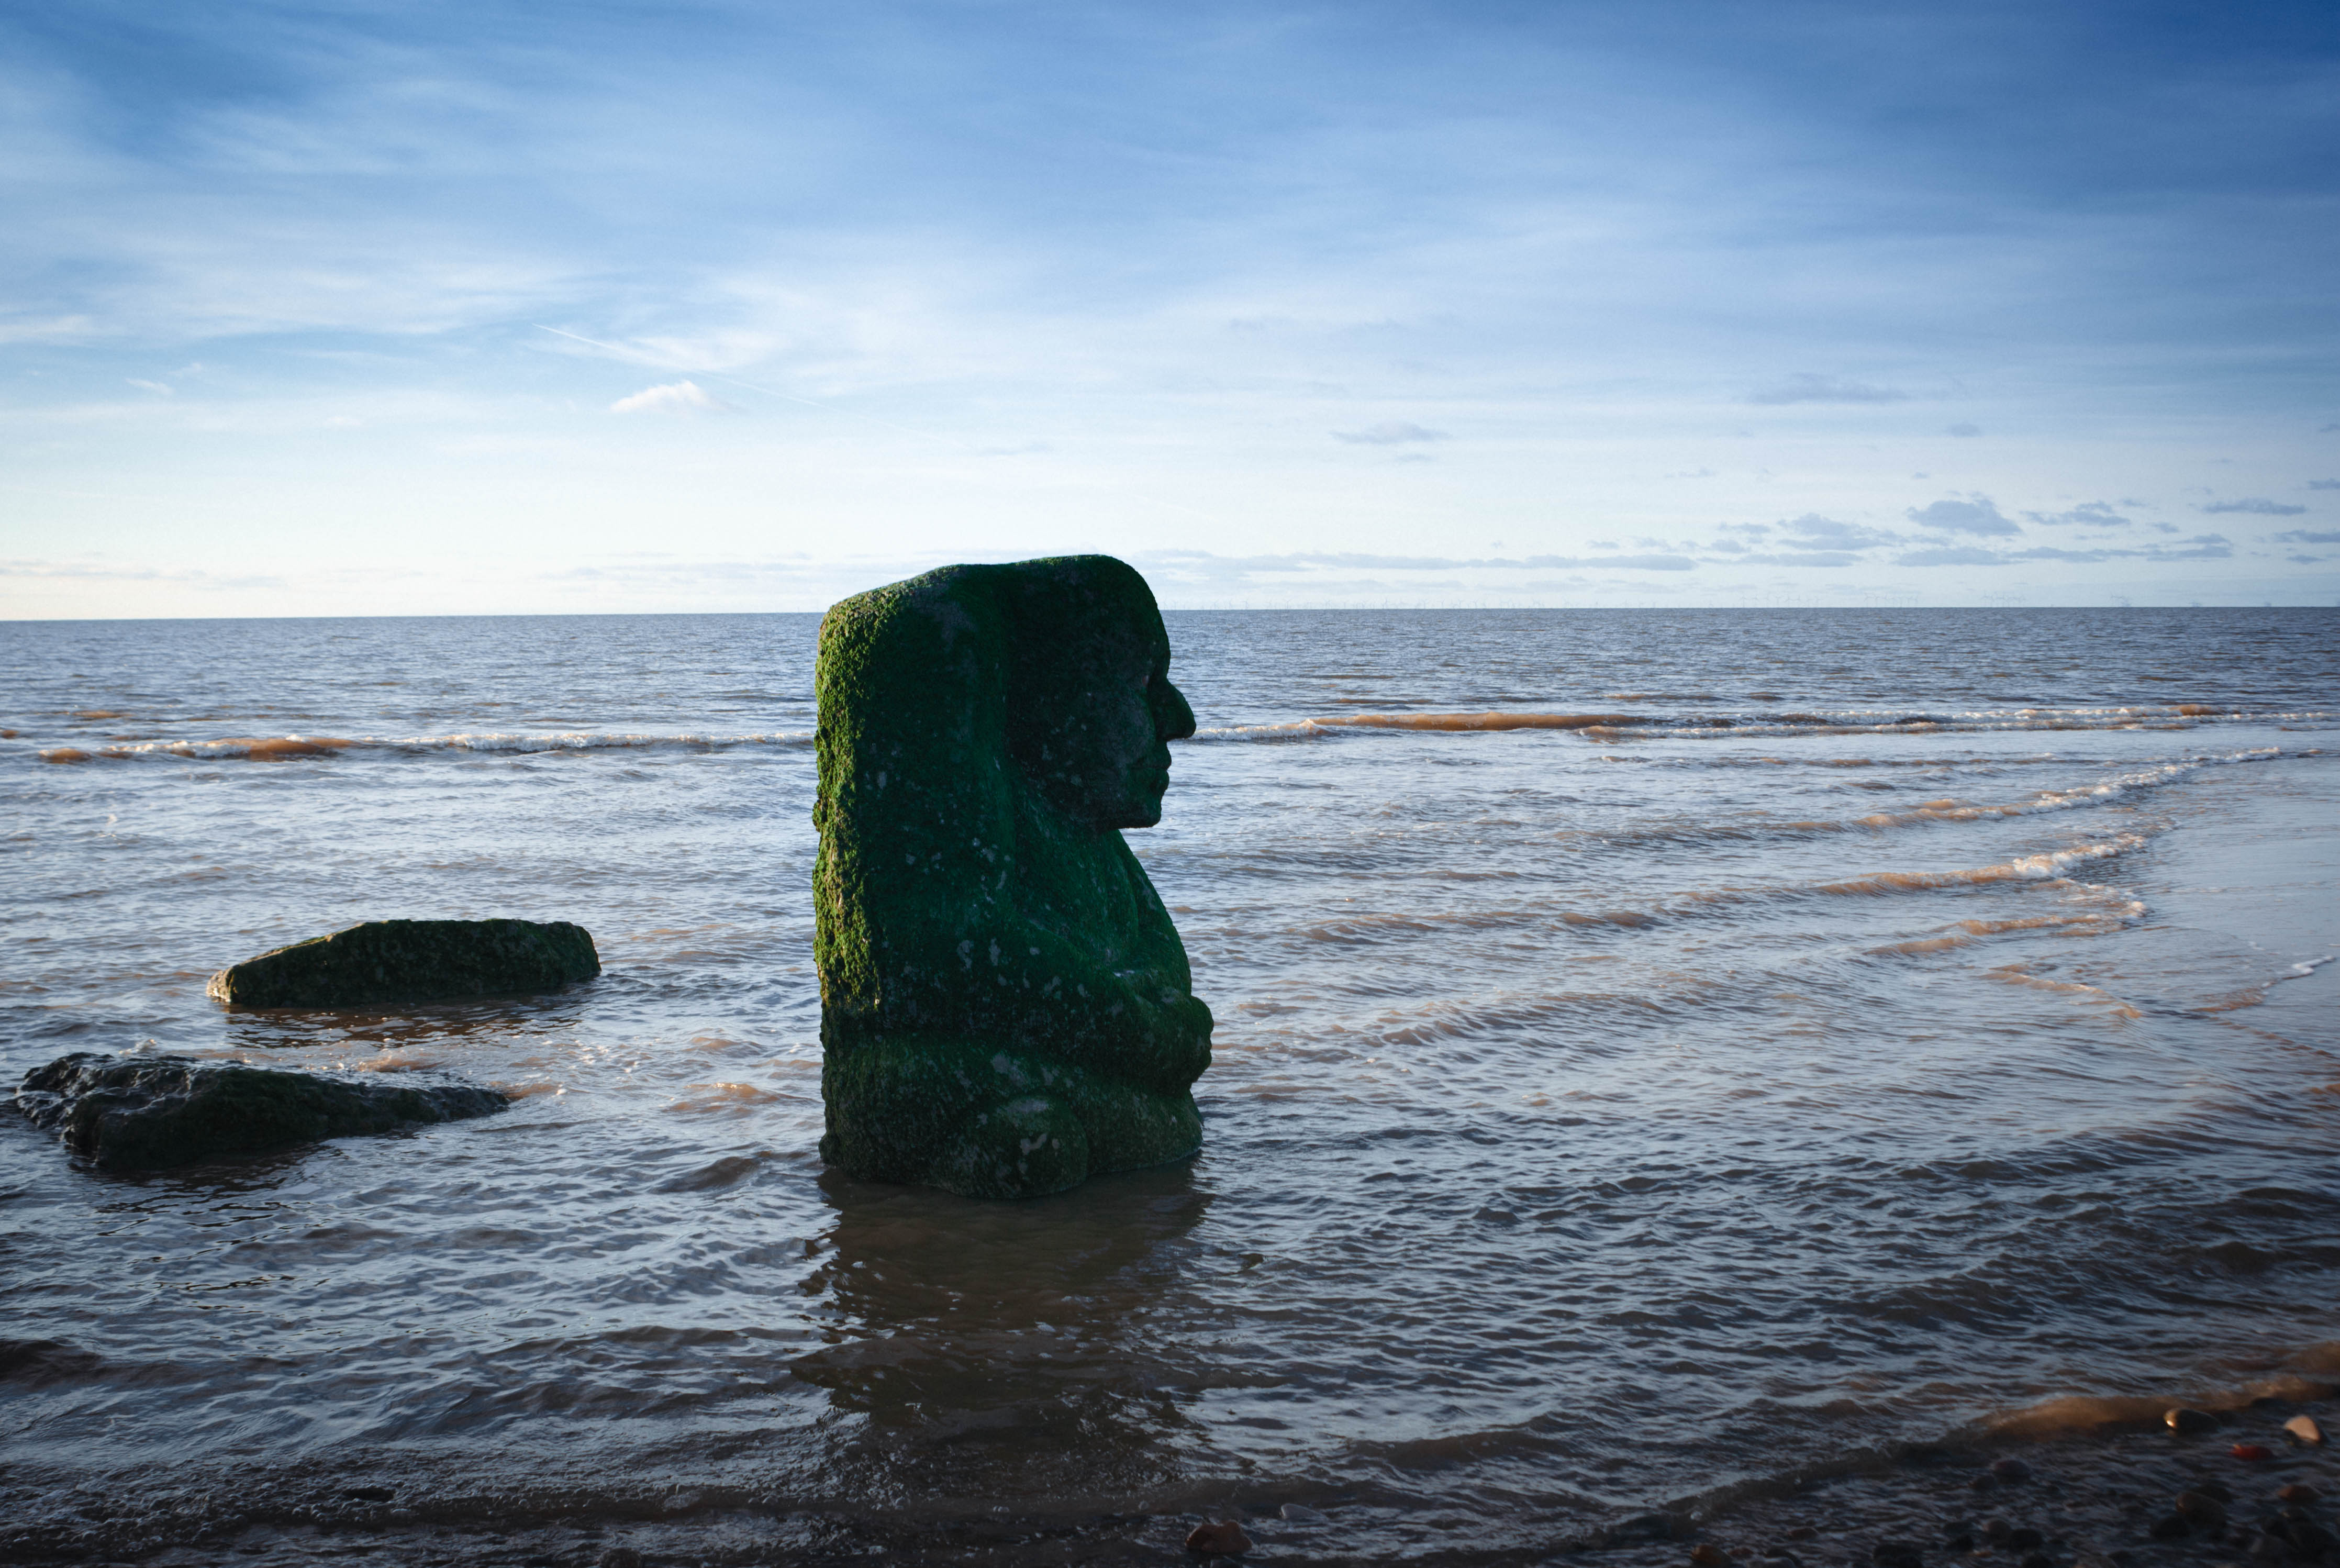 The beach at Cleveleys showing the sea and the sculpture of the sea ogre